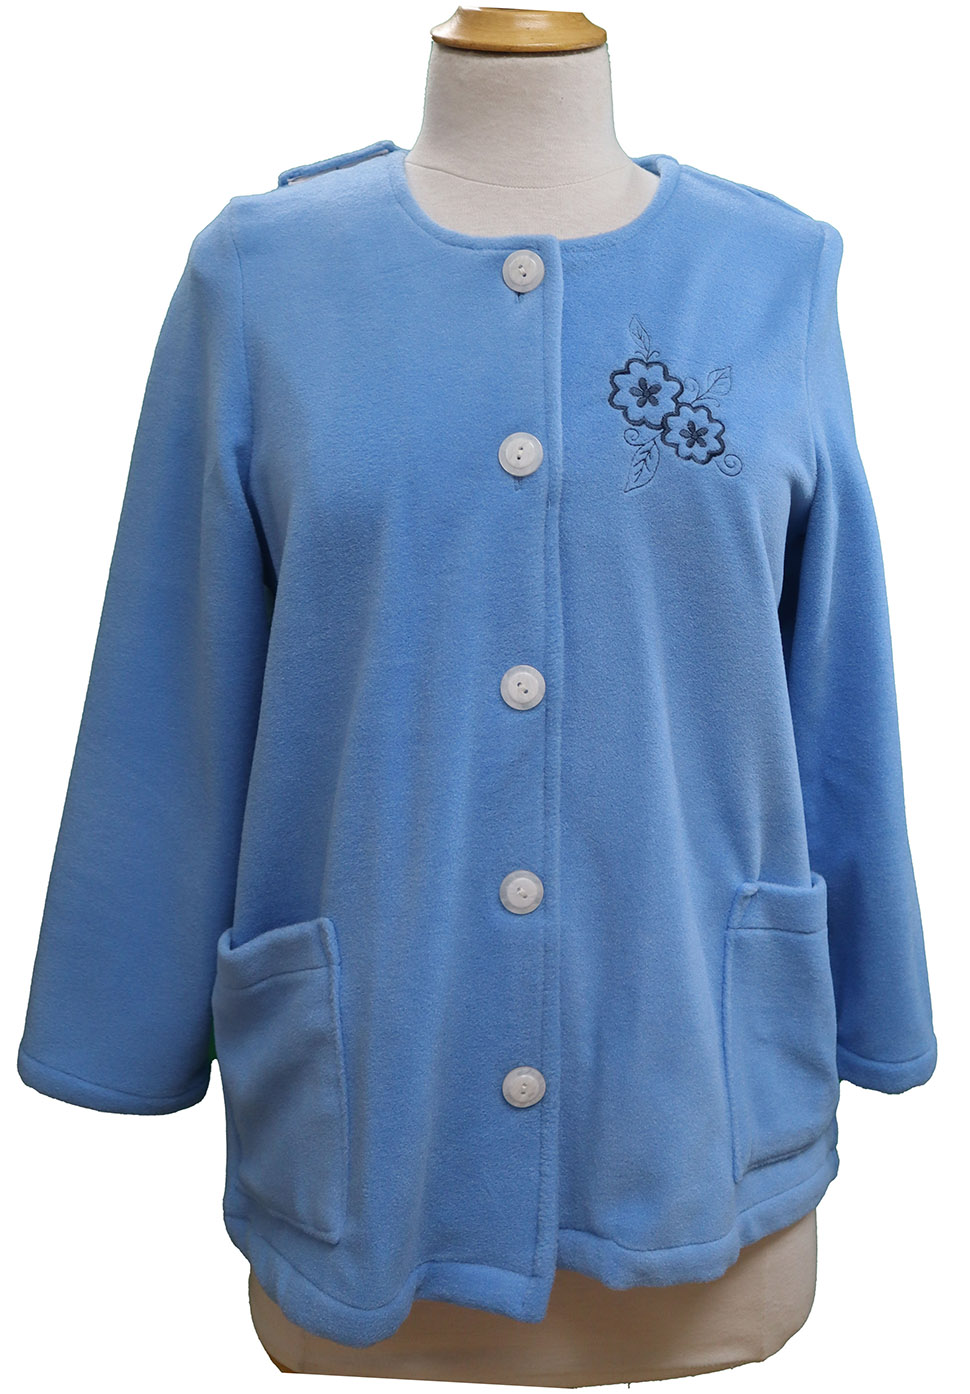 Adaptive Cardigan in Light Blue - Création confort